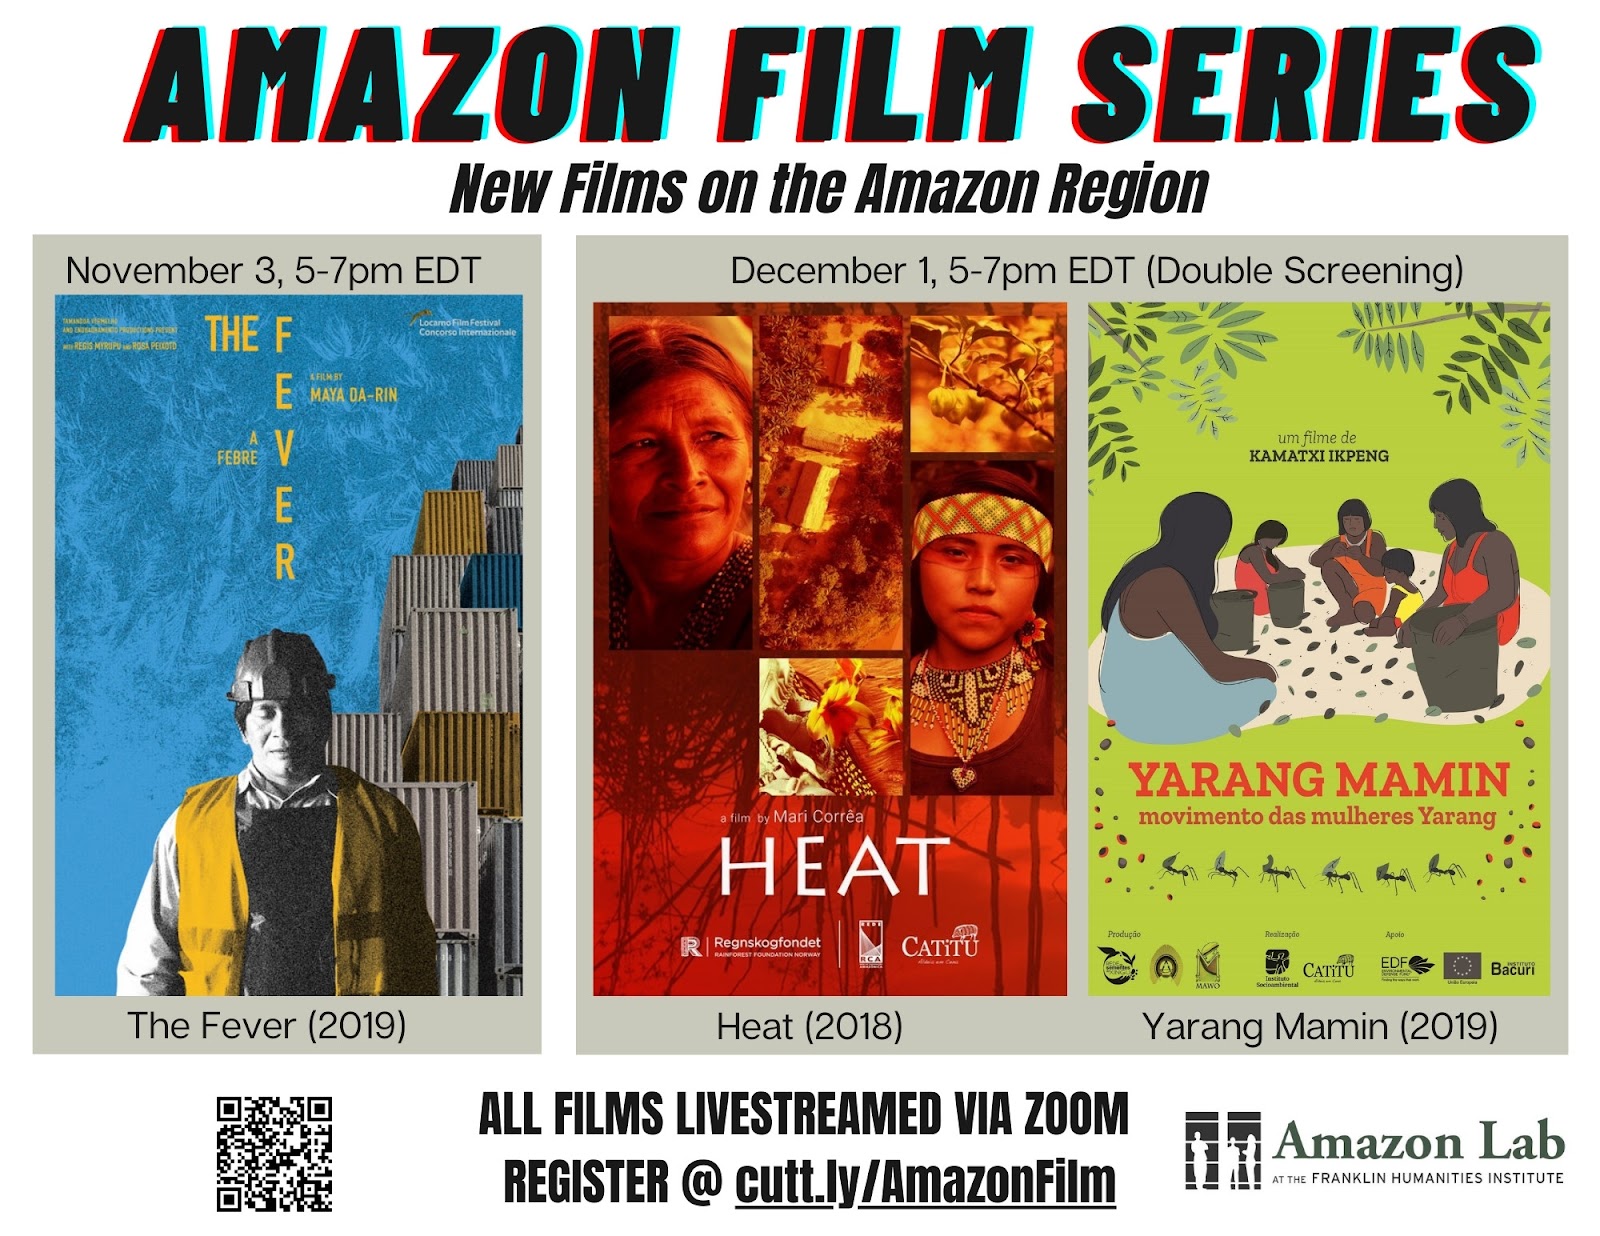 a flier with the heading “Amazon Film Series: New Films on the Amazon Region” on top, with three film posters in the middle, from left to right: “November 3, 5-7pm EDT, The Fever (2019)” Image of a construction worker wearing a hard hat and a yellow vest, with his eyes closed, against a blue background and a stack of container at a container shipping yard. “December 1, 5-7pm EDT (Double Screening): Heat (2018) and Yarang Mamin (2019)” Image of a film poster for “Heat,” “a film by Mari Correa” with red-tinted images of an Indigenous older woman and an Indigenous younger boy, and images of fruit on a tree. Image of a film poster for “Yarang Mamin: movimento das mulheres Yarang, un filme de Kamatxi Ikpeng,” with images of five dark brown-skinned, black-haired Indigenous people sitting in a circle, harvesting leaves in baskets. The bottom of the flier has the text: “All films livestreamed via Zoom, register @ cutt.ly/AmazonFilm” and “Amazon Lab at the Franklin Humanities Institute.”